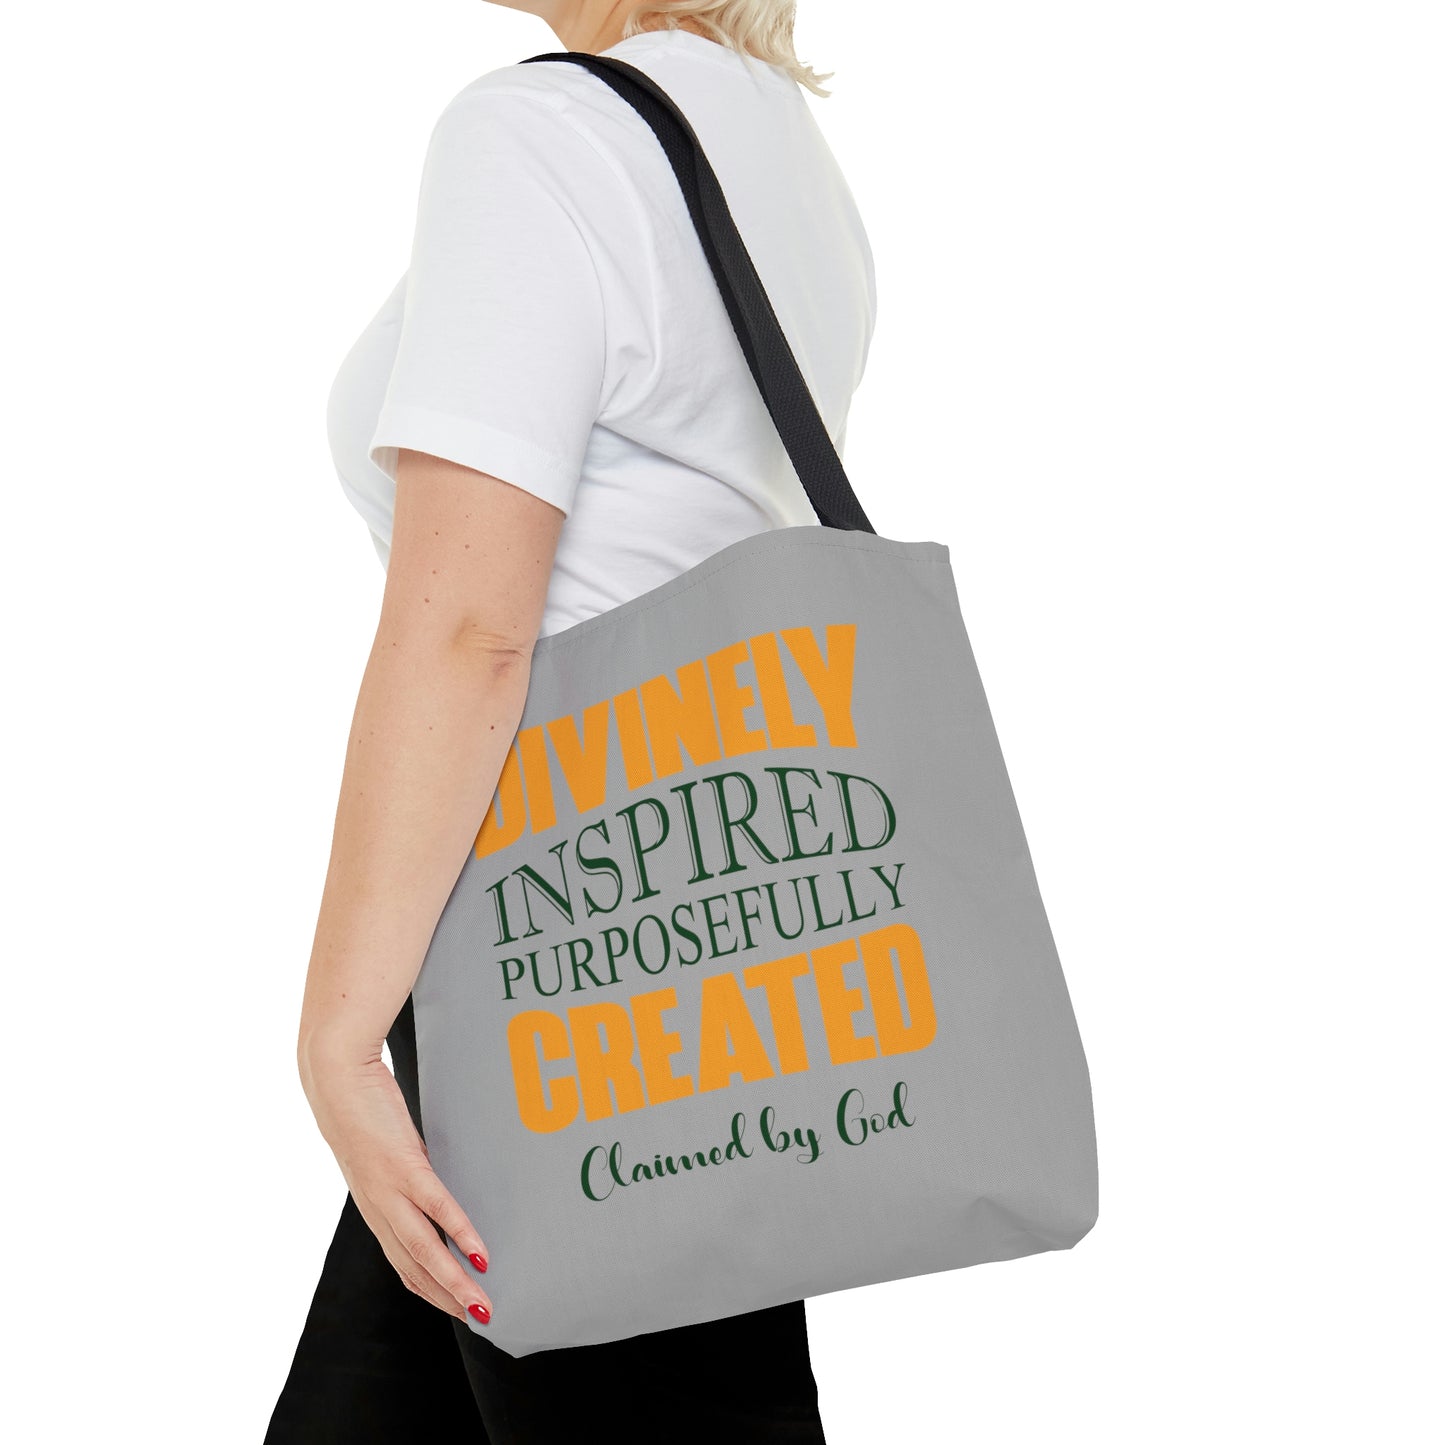 Divinely Inspired Purposefully Created Tote Bag